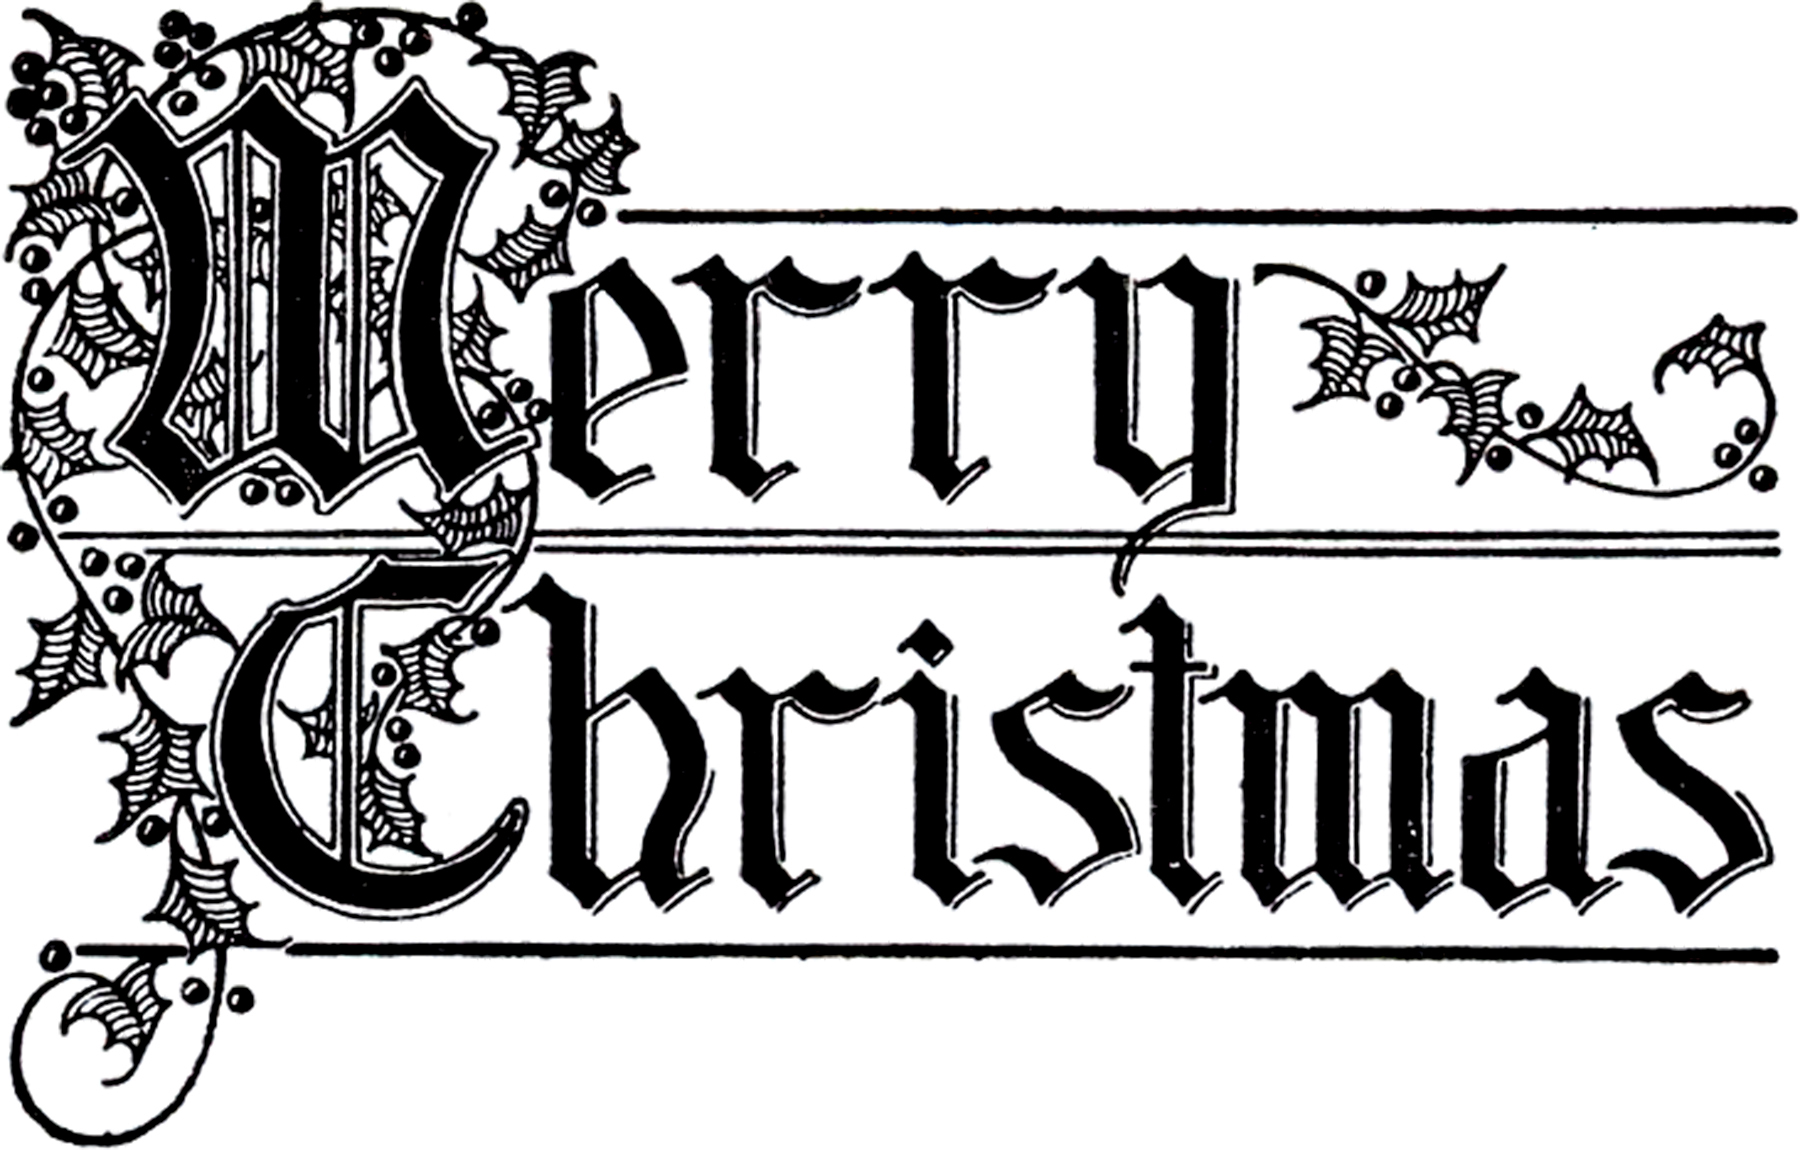 Merry Christmas Black And White Stock Photos & Images